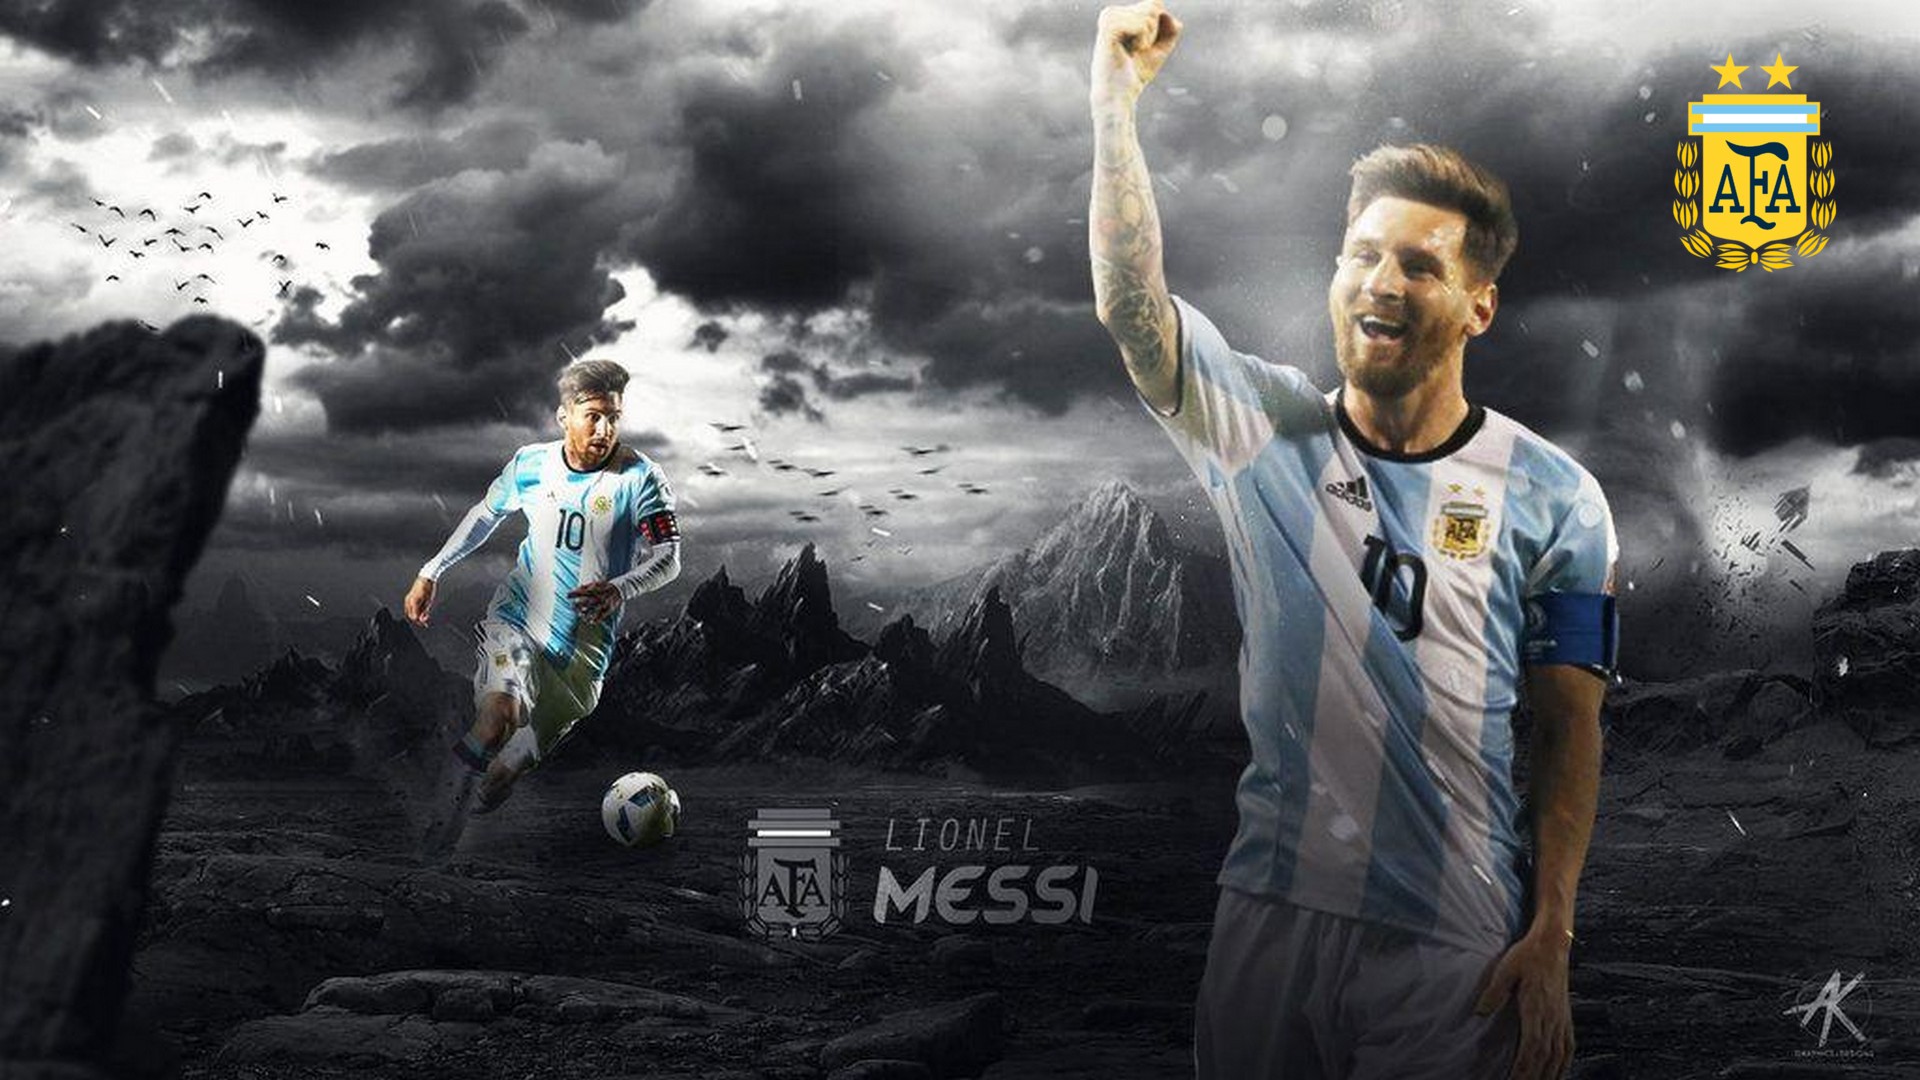 Wallpapers HD Messi Argentina with resolution 1920x1080 pixel. You can make this wallpaper for your Mac or Windows Desktop Background, iPhone, Android or Tablet and another Smartphone device